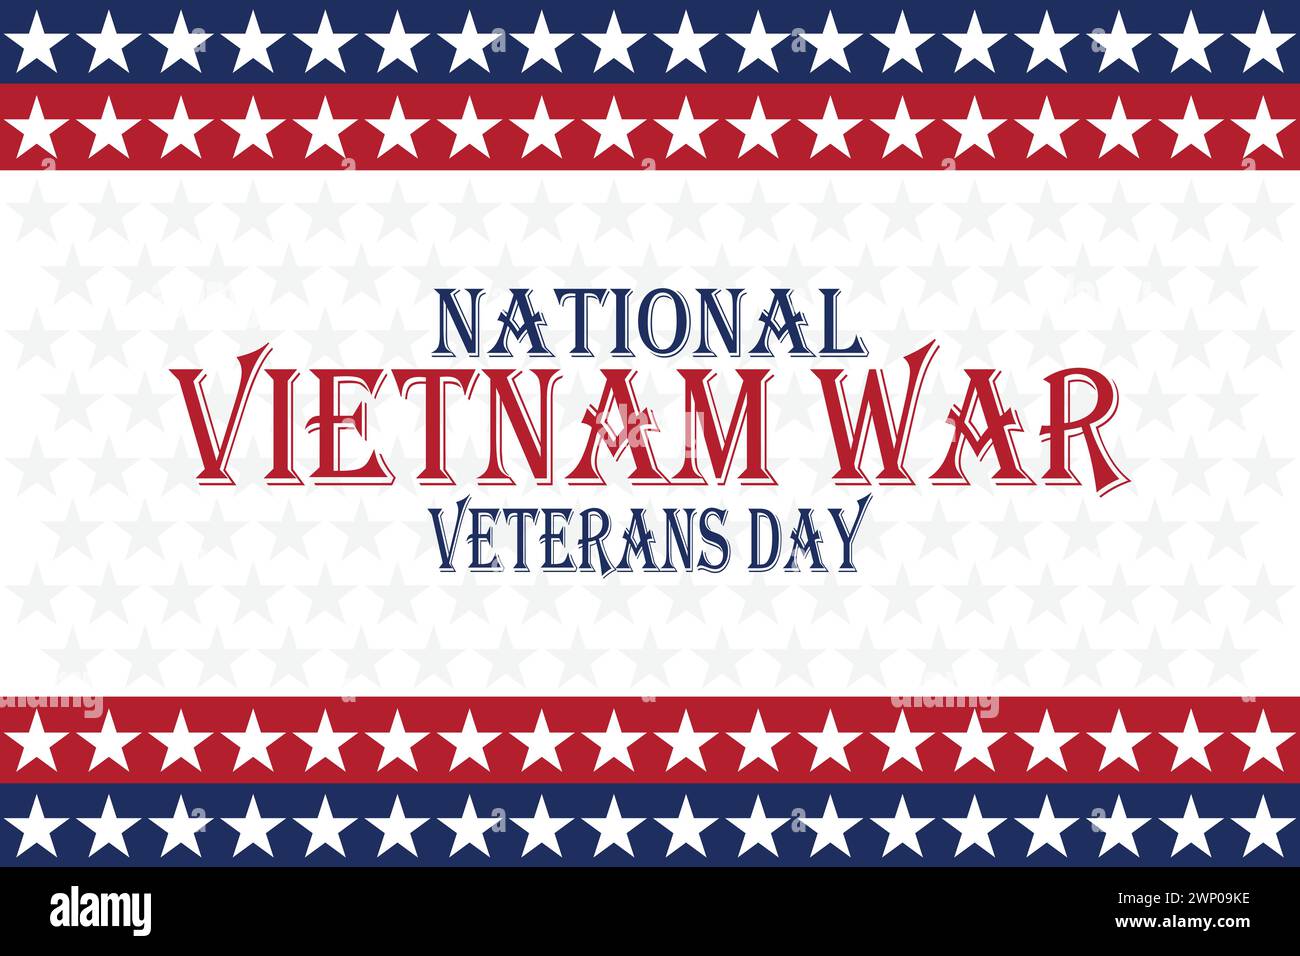 National Vietnam War Veterans Day. Holiday concept. Template for background, banner, card, poster with text inscription Stock Vector